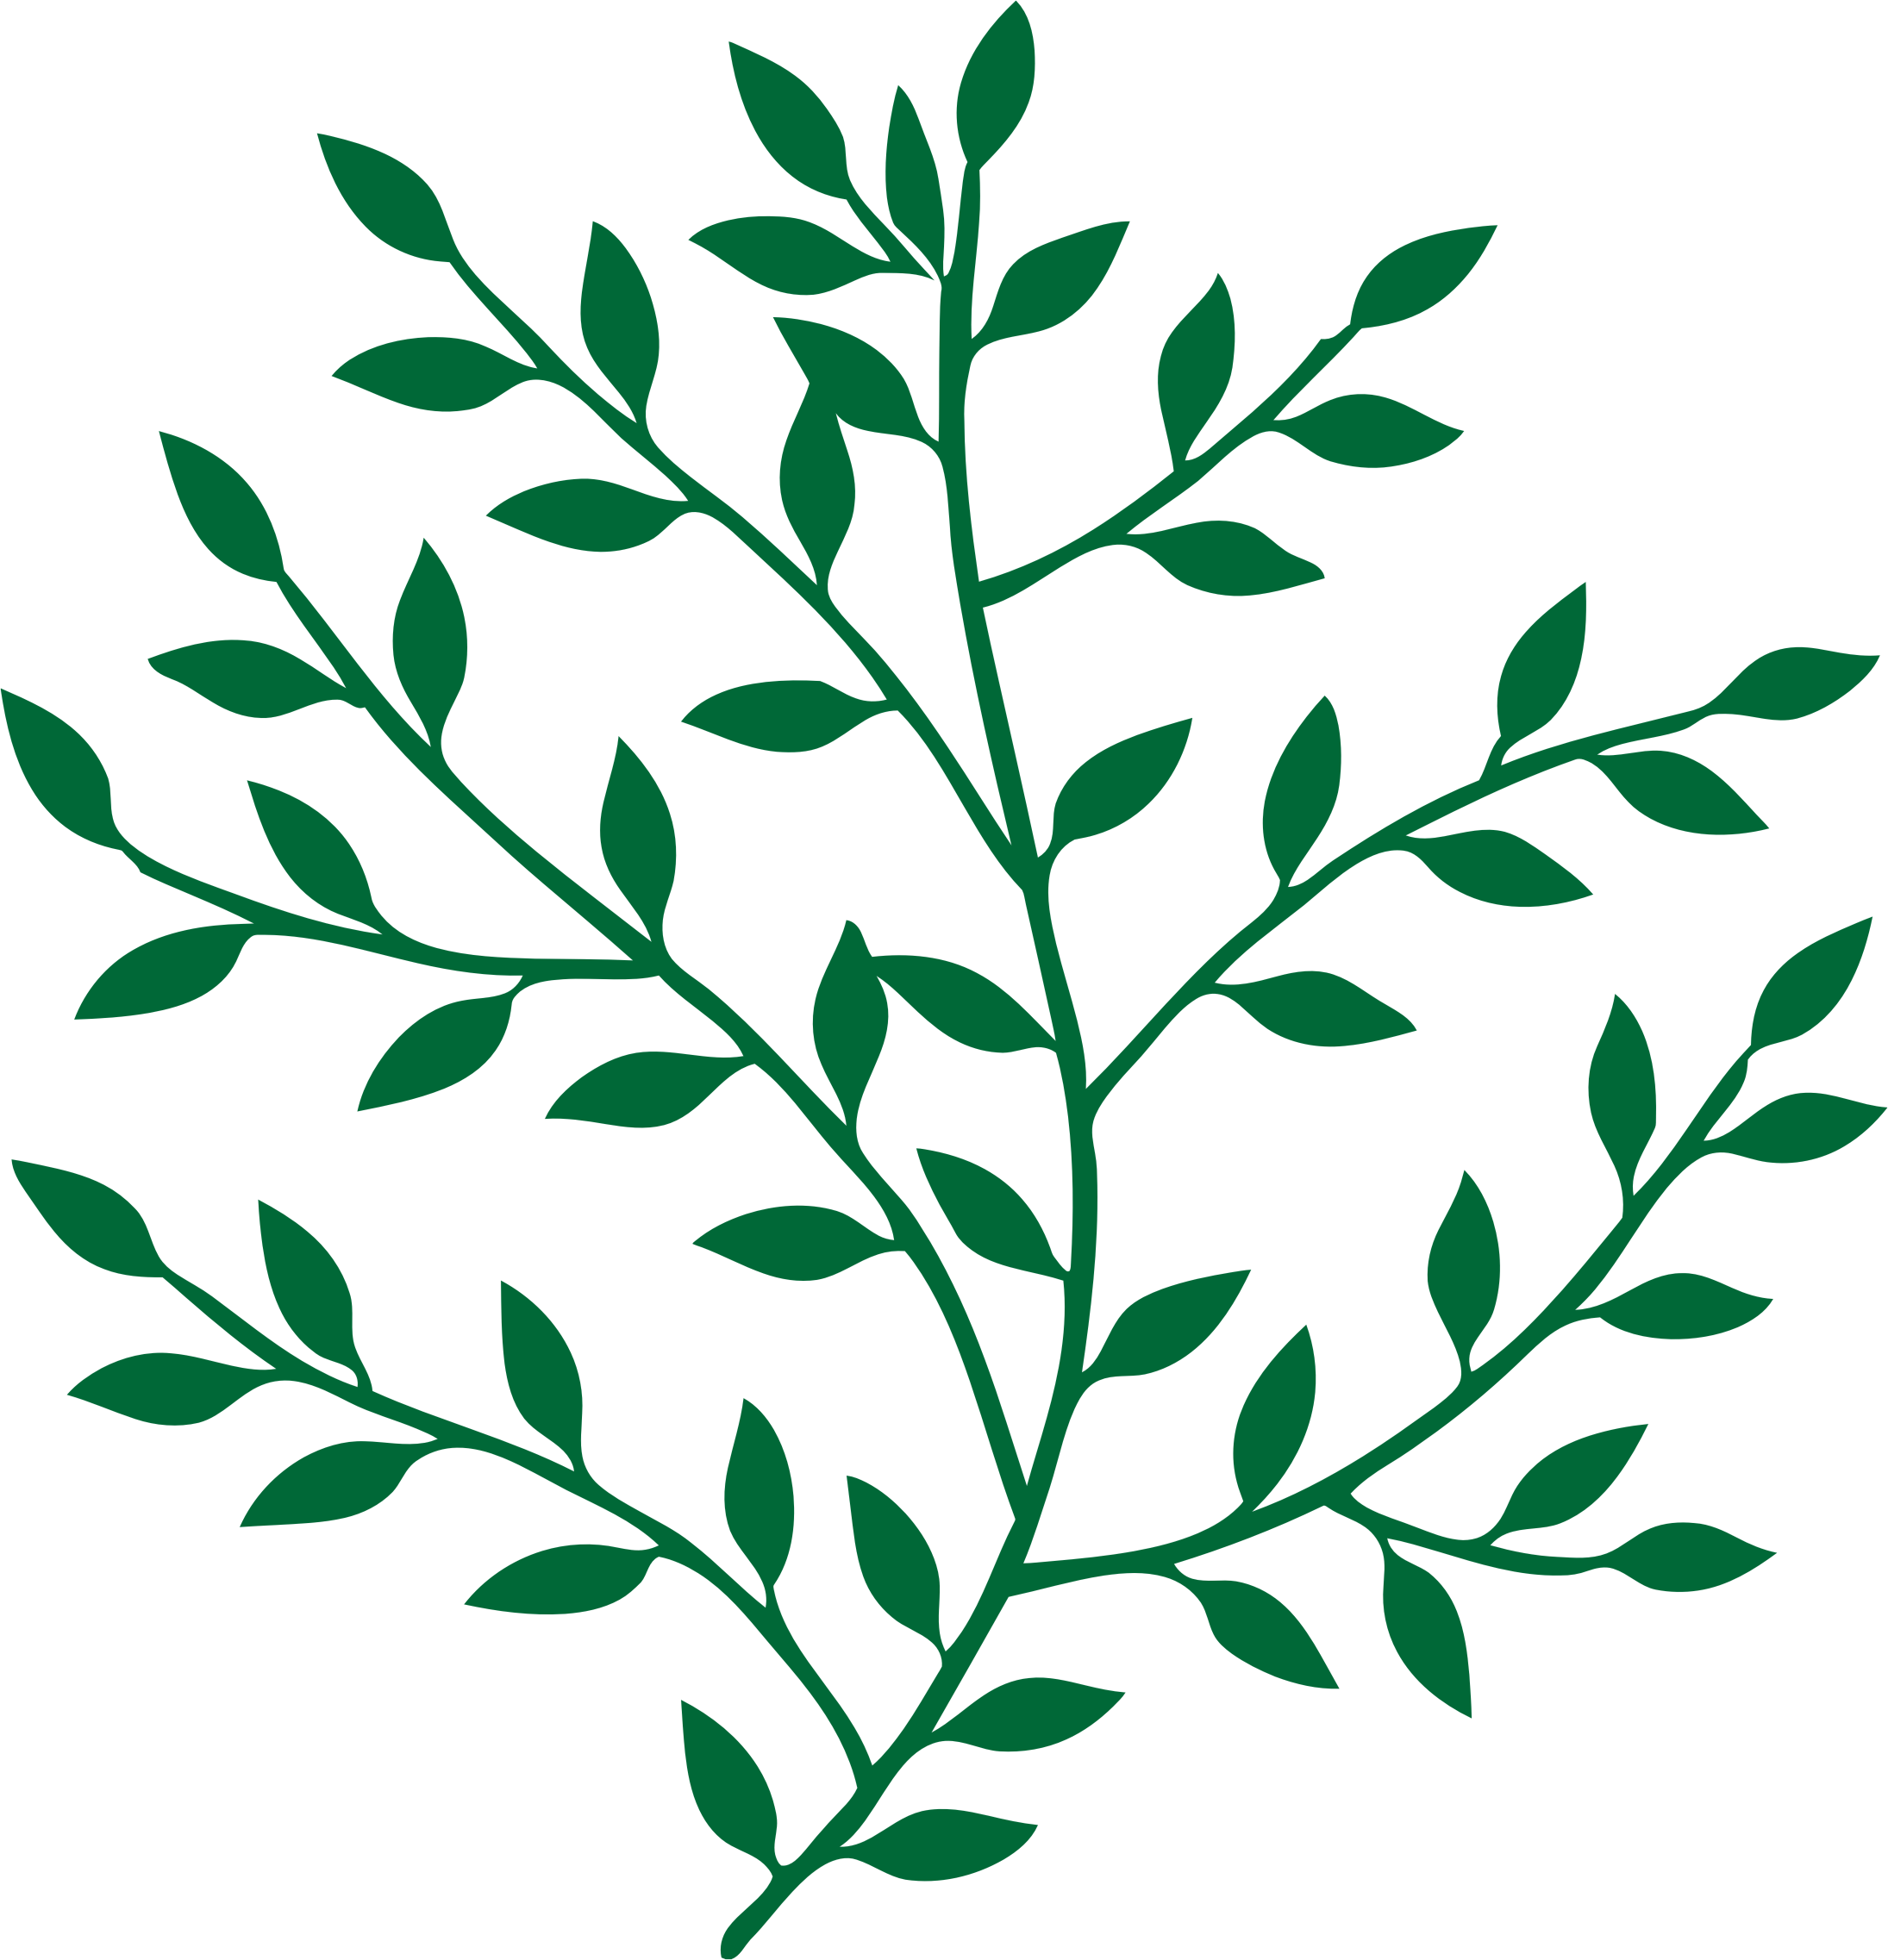 Branches With Leaves - Small Leaves Png (2190x2274)